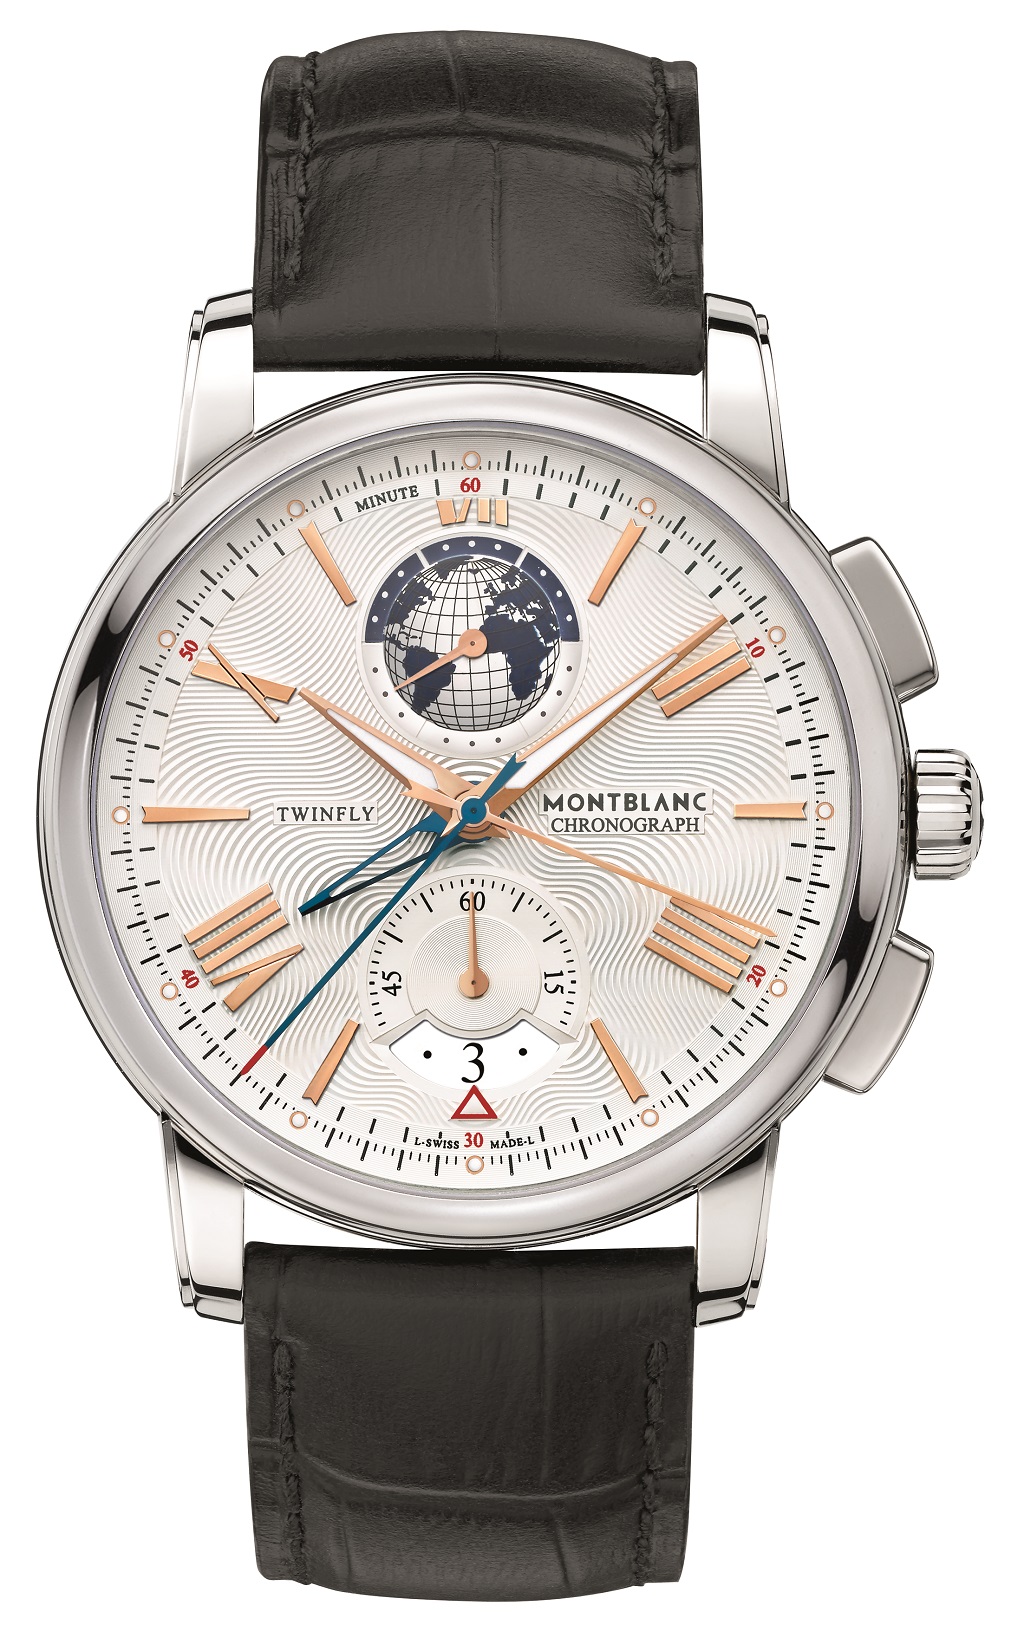 Montblanc 4810 TwinFly Chronograph 110 Years Edition